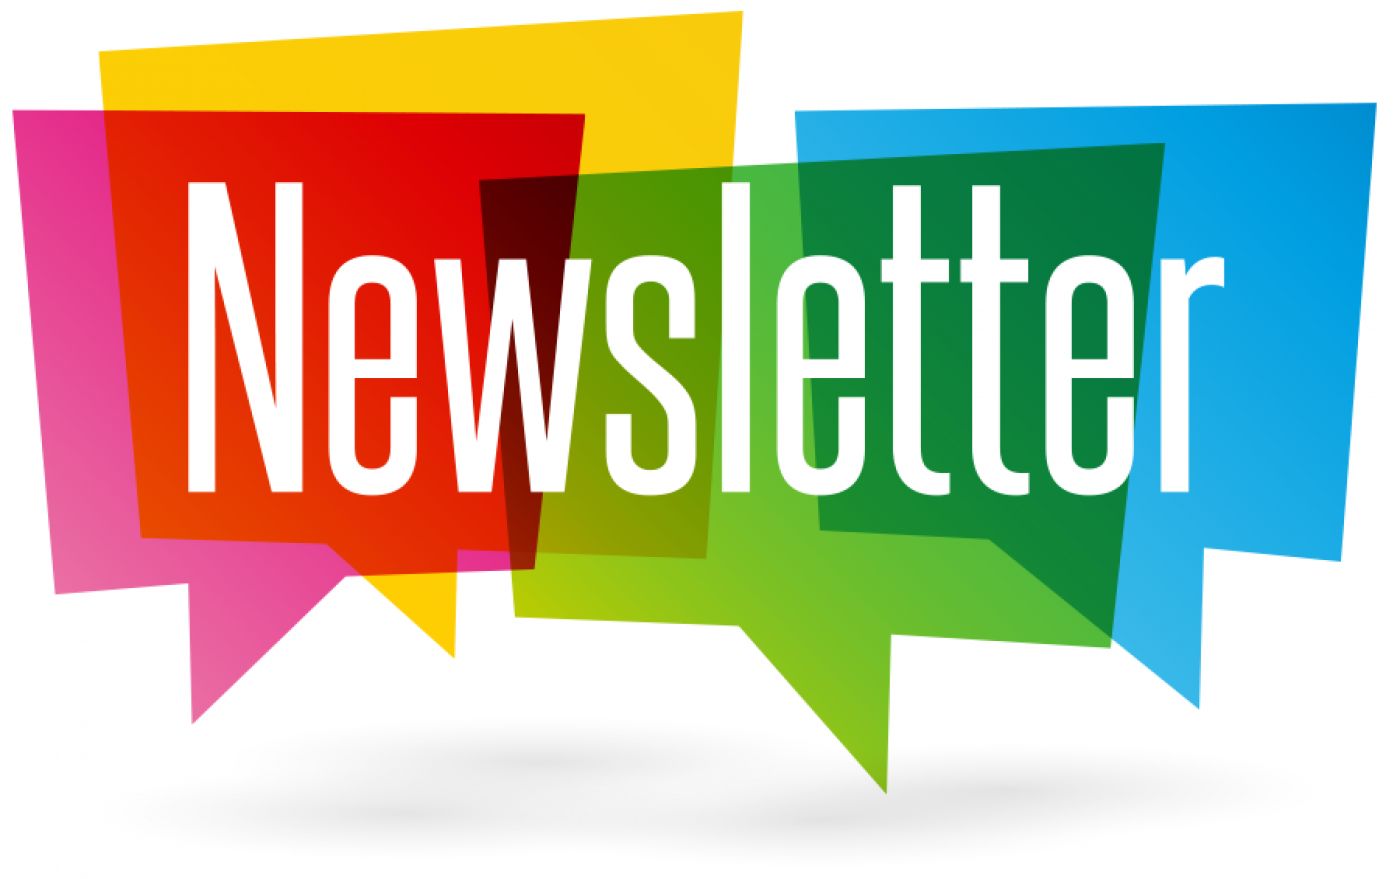 Changes to newsletter coming